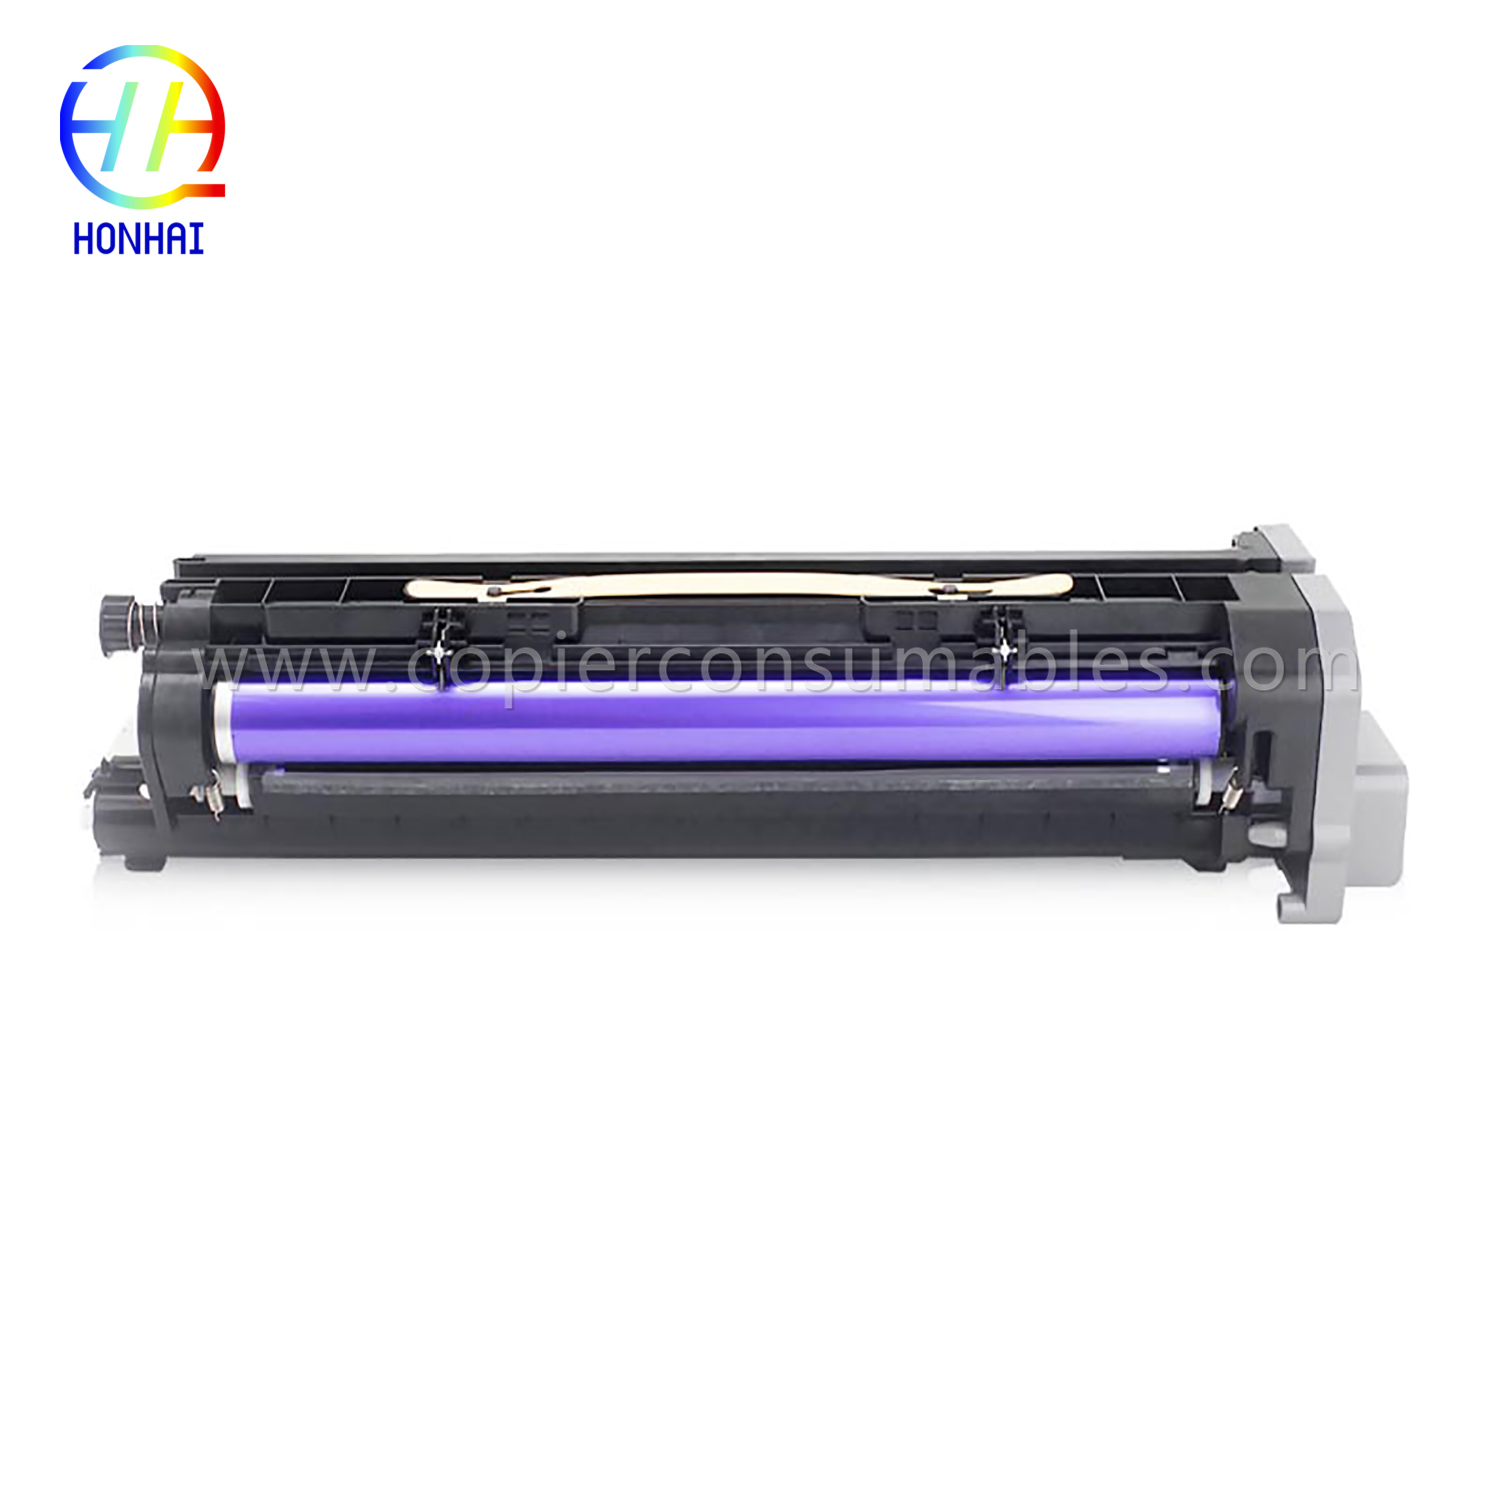 Drum Unit for Xerox Dcc2060 Wc5330 Wc5335 Wc5220